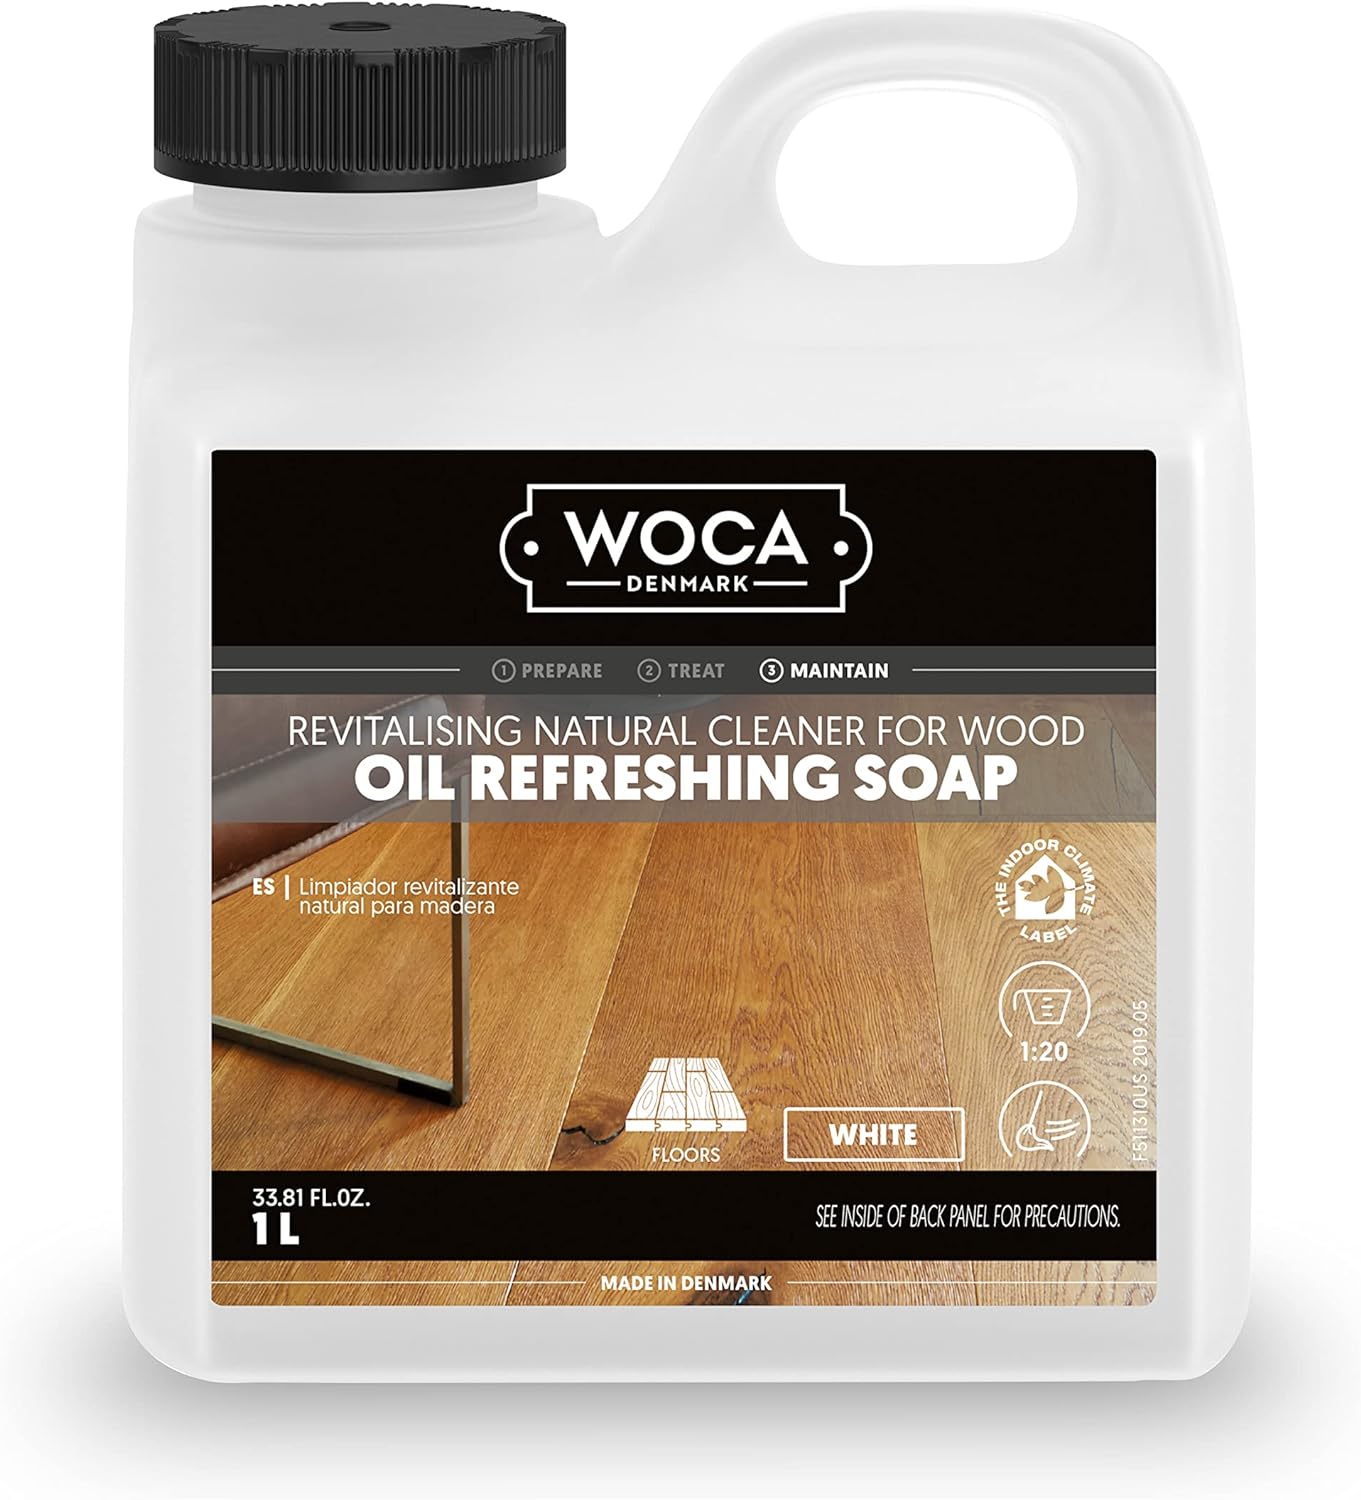 WOCA Denmark Oil Refreshing Soap White 1L, Concentrated Rejuvenator for Oiled or Waxed Wood. Food Contact Safe, Plant Based, made for floors and furniture